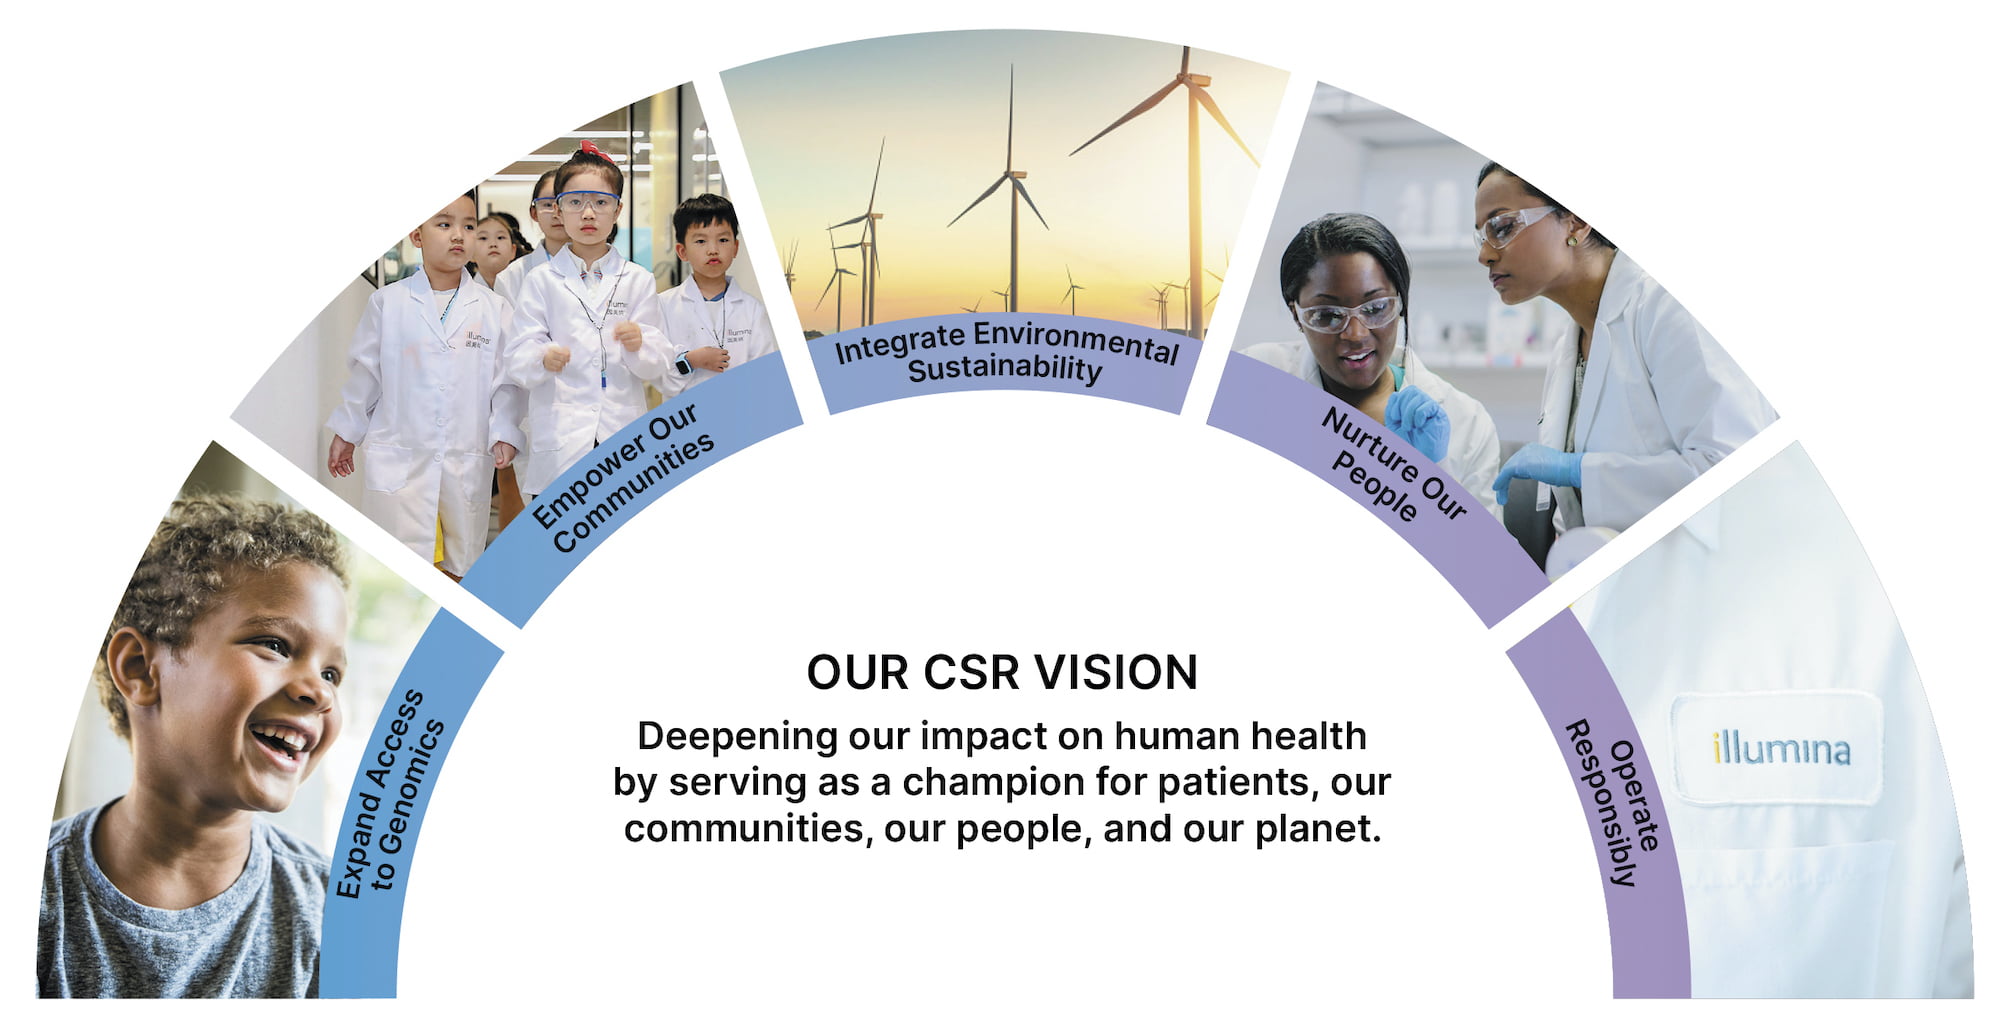 Our CSR Vision - deepening our impact on human health by serving as a champion for patients, our communities, our people, and our planet.